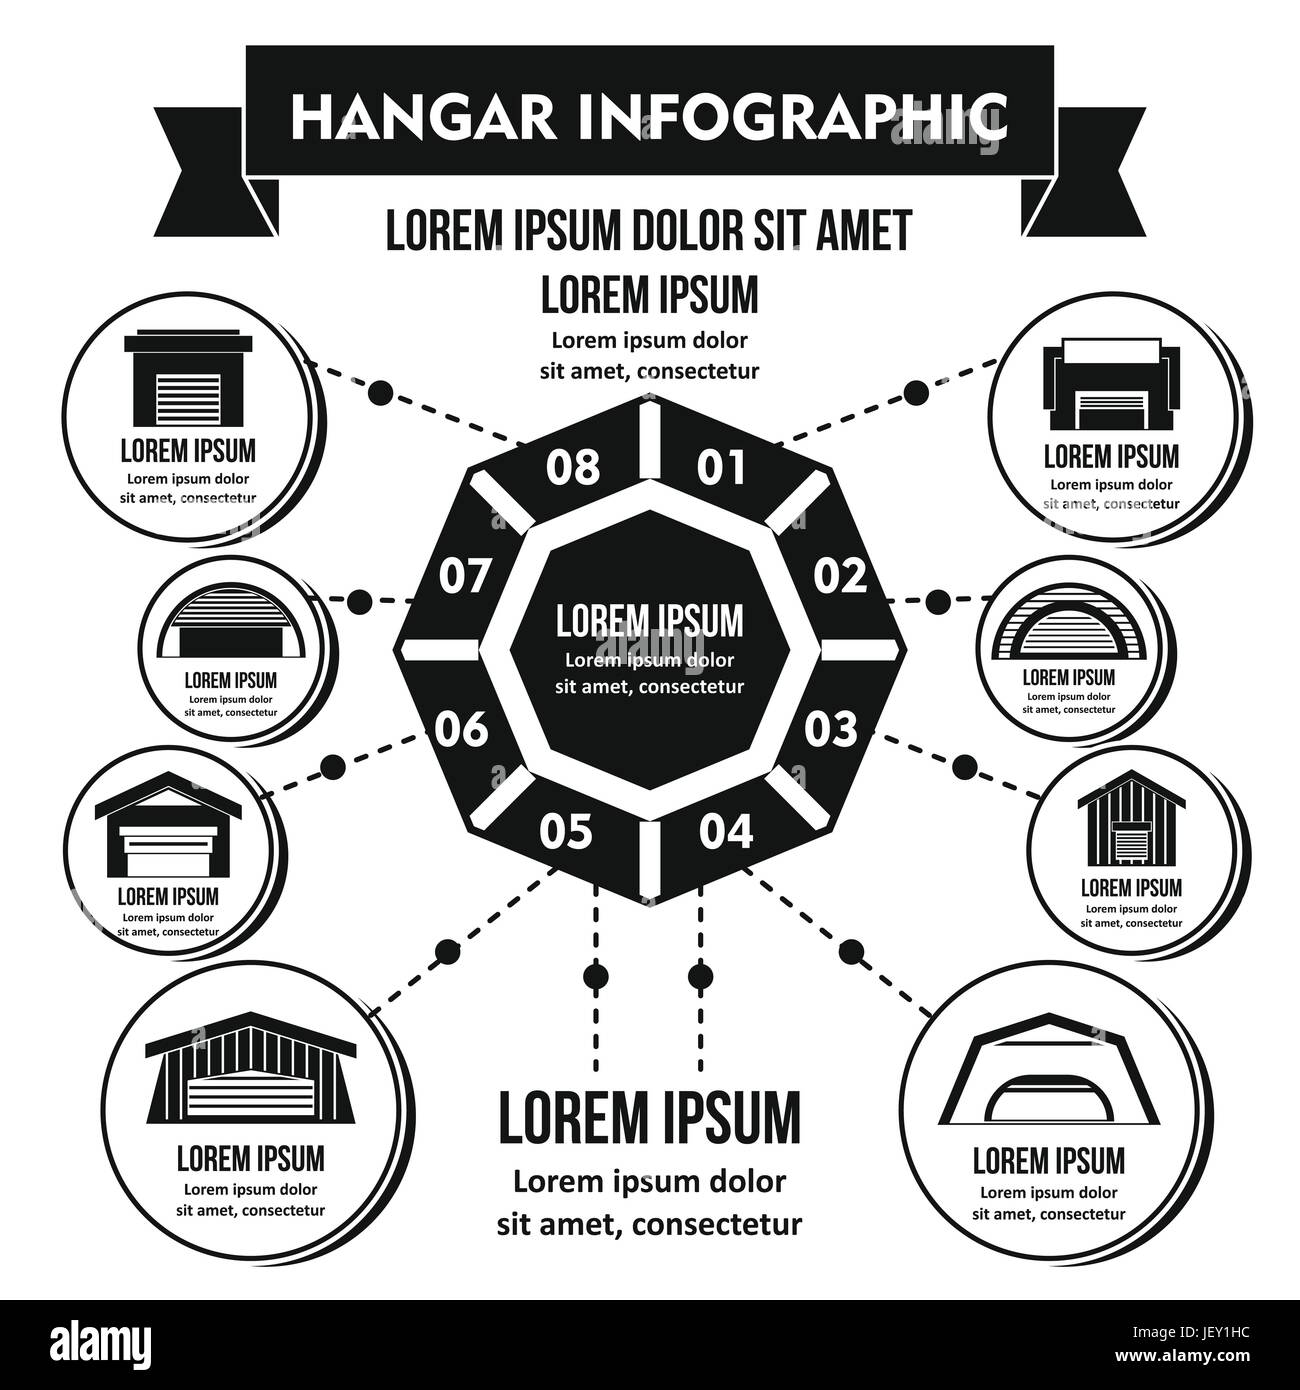 Hangar infographic concept, simple style Stock Vector